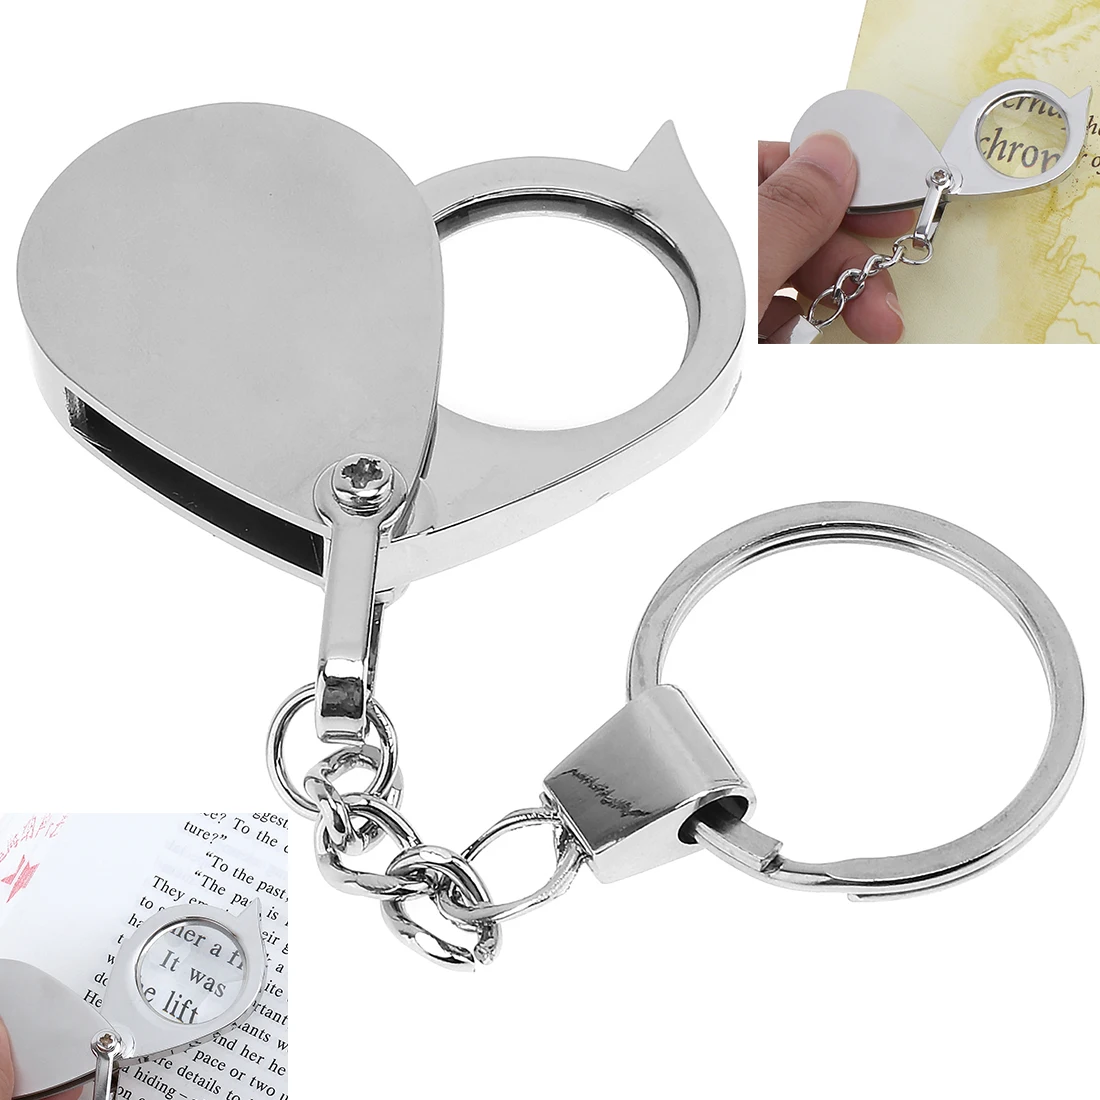 

Magnifiers 8X Metal Foldable Handheld Silver Optical Glass Magnifier Daily Loupe Tool with Key Chain for Reading and Inspection